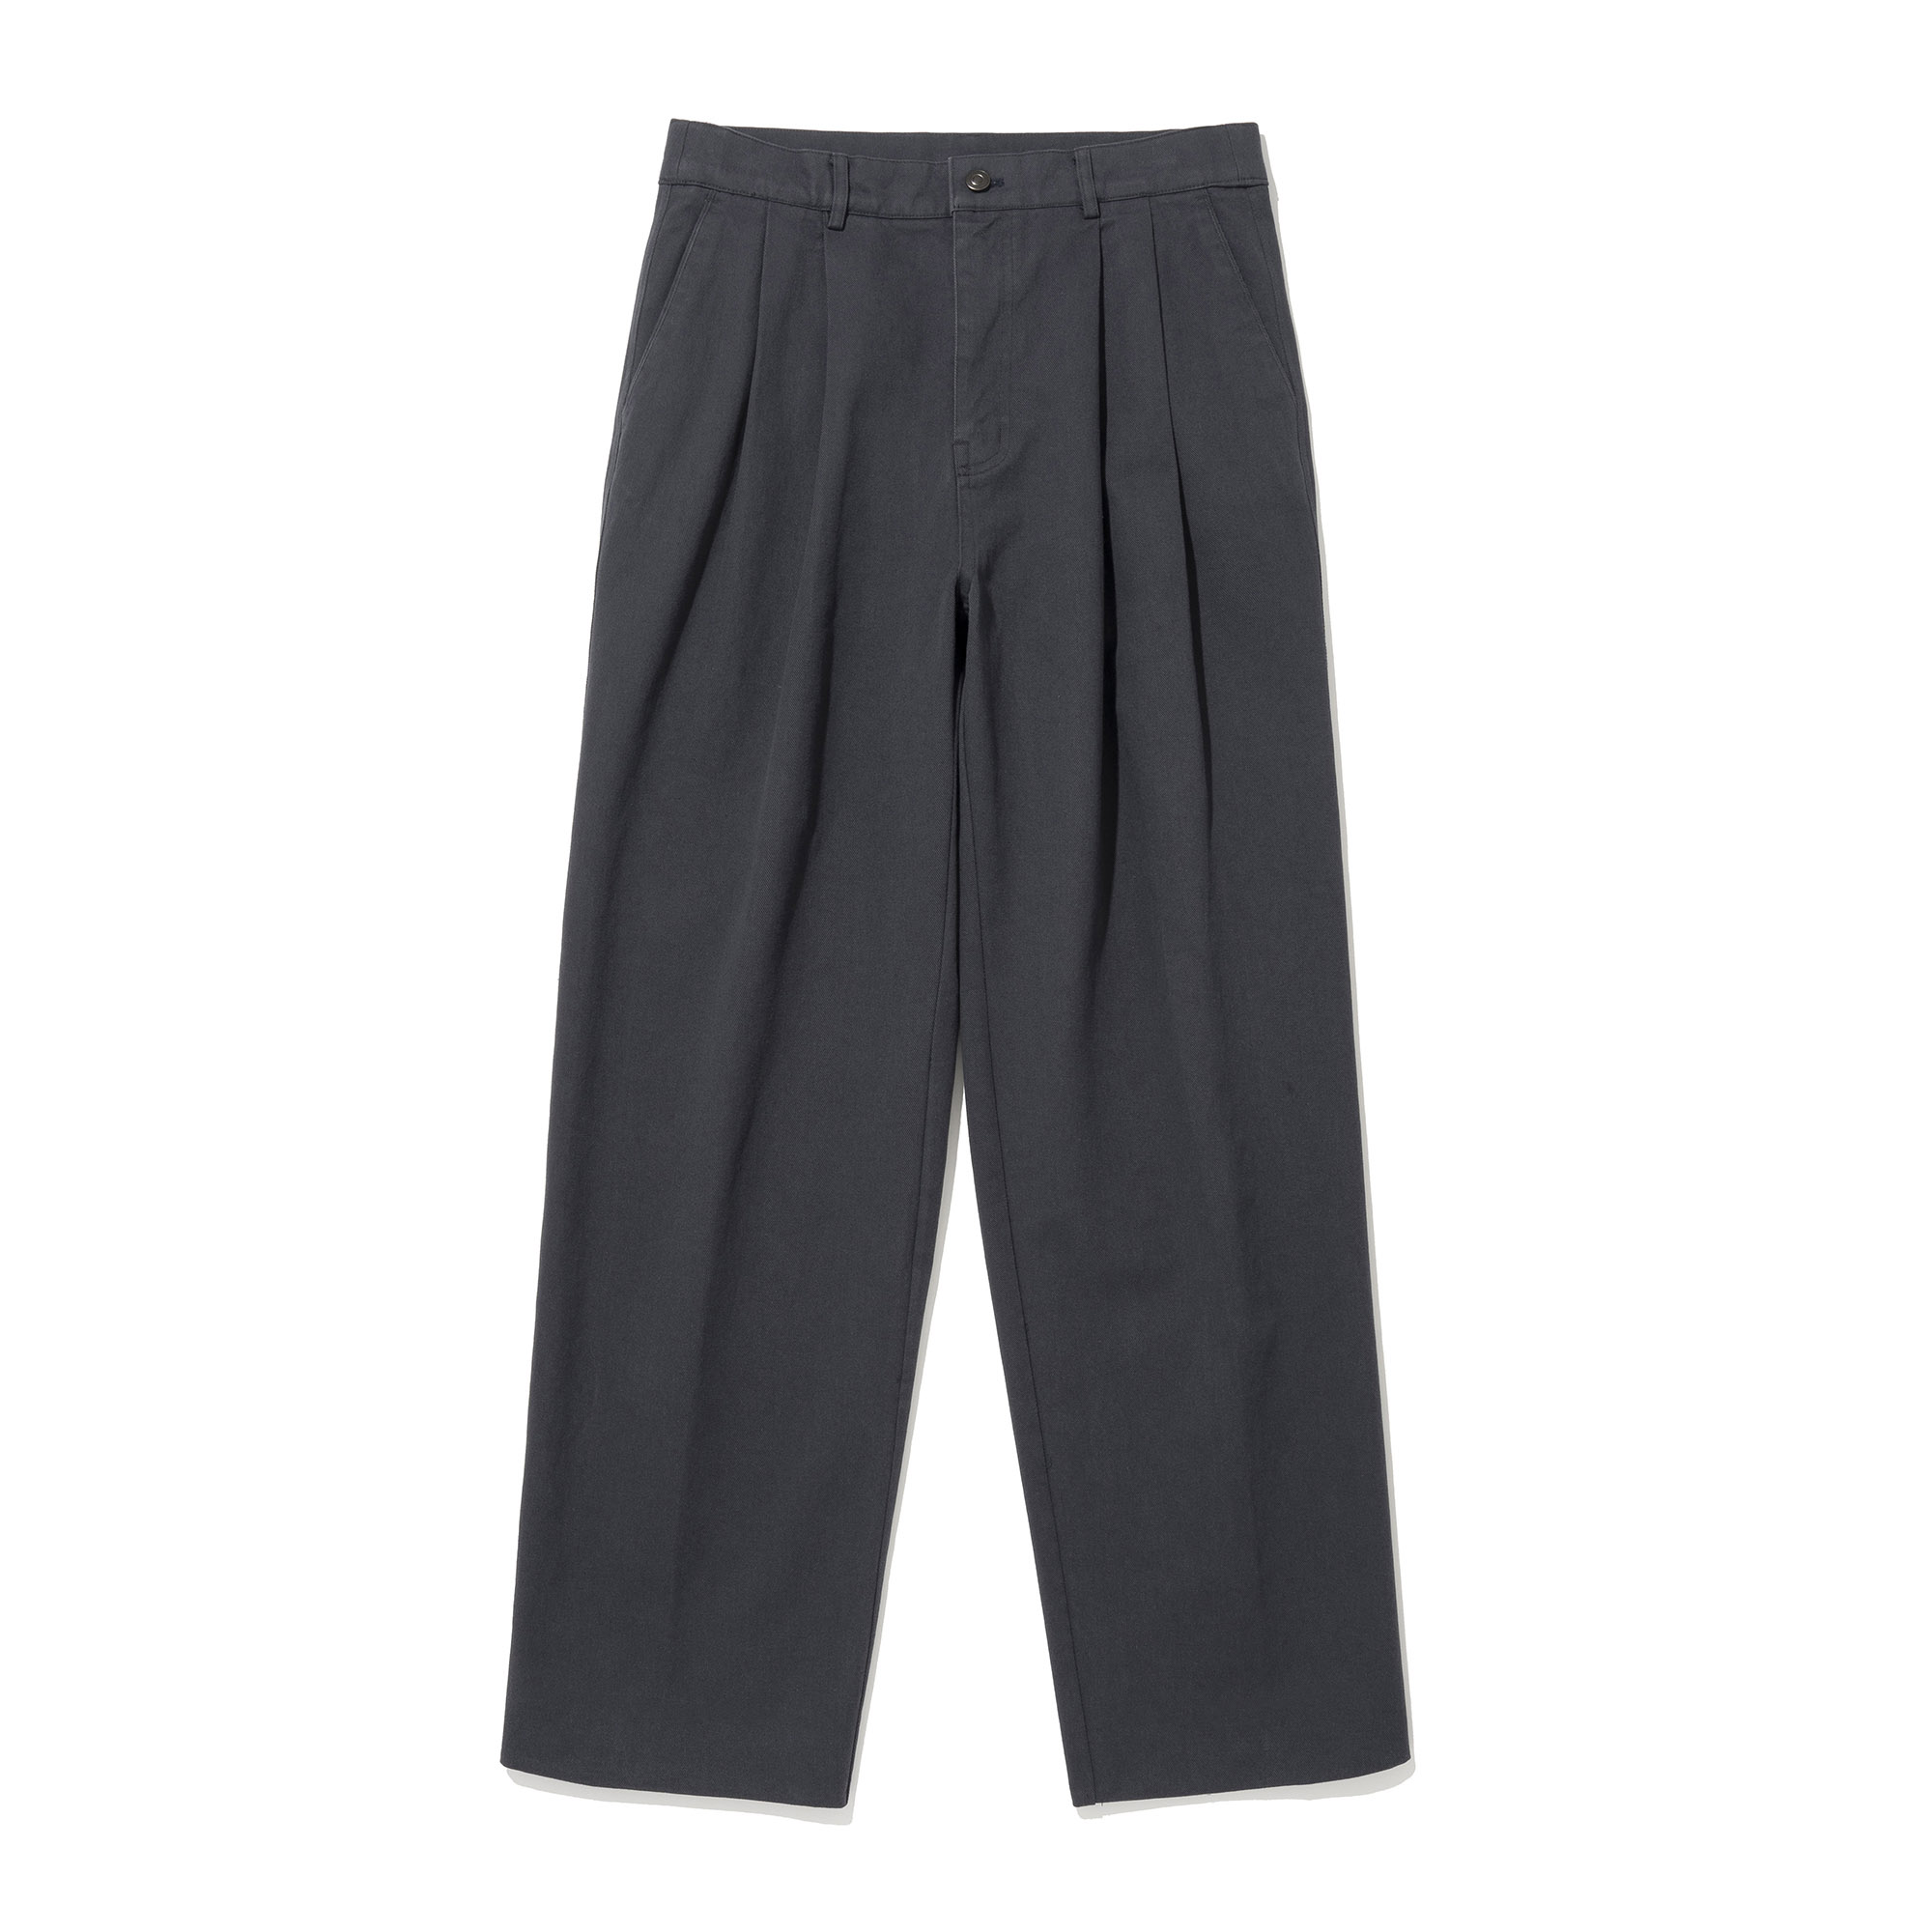 [COMPULSORY LINE] FRONT TWO TUCK DT CHINO PANTS #2(공식 온라인스토어 단독 발매)